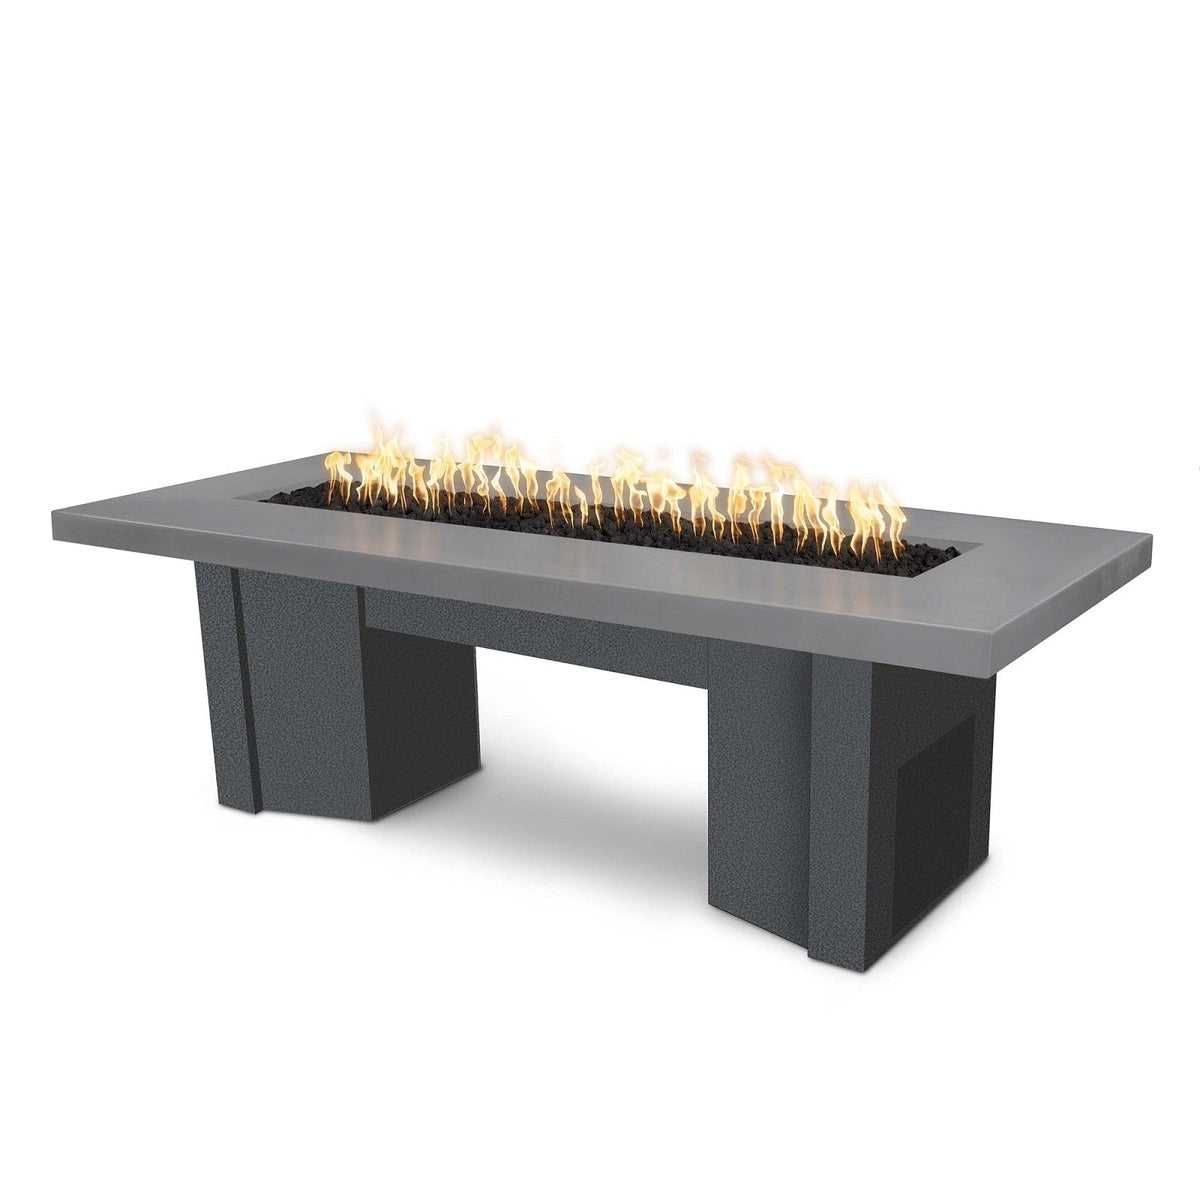 The Outdoor Plus Fire Features Natural Gray (-NGY) / Silver Vein Powder Coated Steel (-SLV) The Outdoor Plus 78&quot; Alameda Fire Table Smooth Concrete in Natural Gas - 110V Plug &amp; Play Electronic Ignition / OPT-ALMGFRC78EKIT-NG